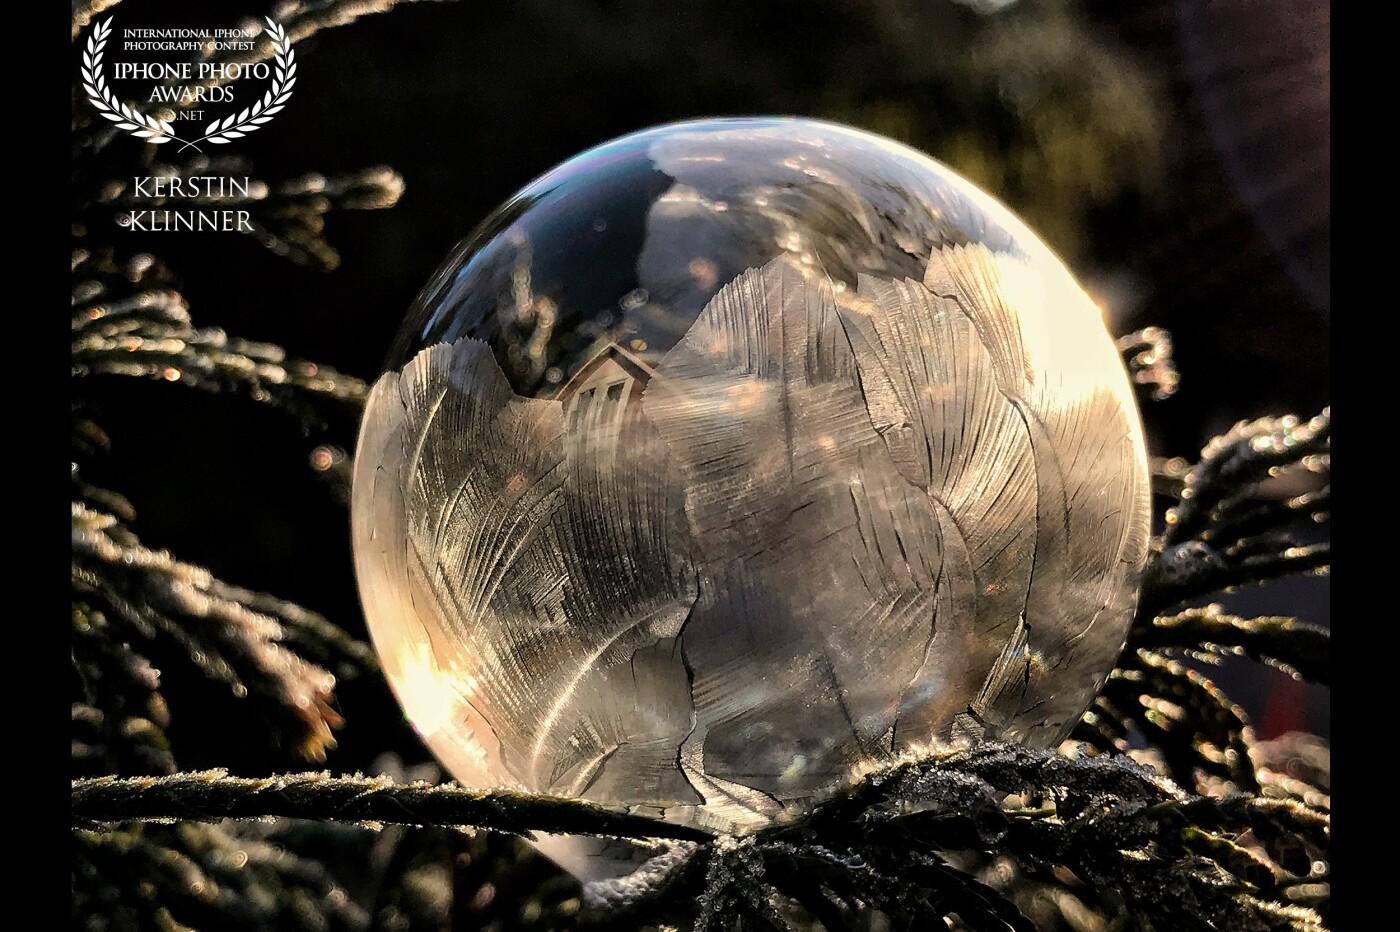 It was a very cold morning and completely windless - the best conditions to freeze soap bubbles. The picture was taken with an iPhone 7 Plus.